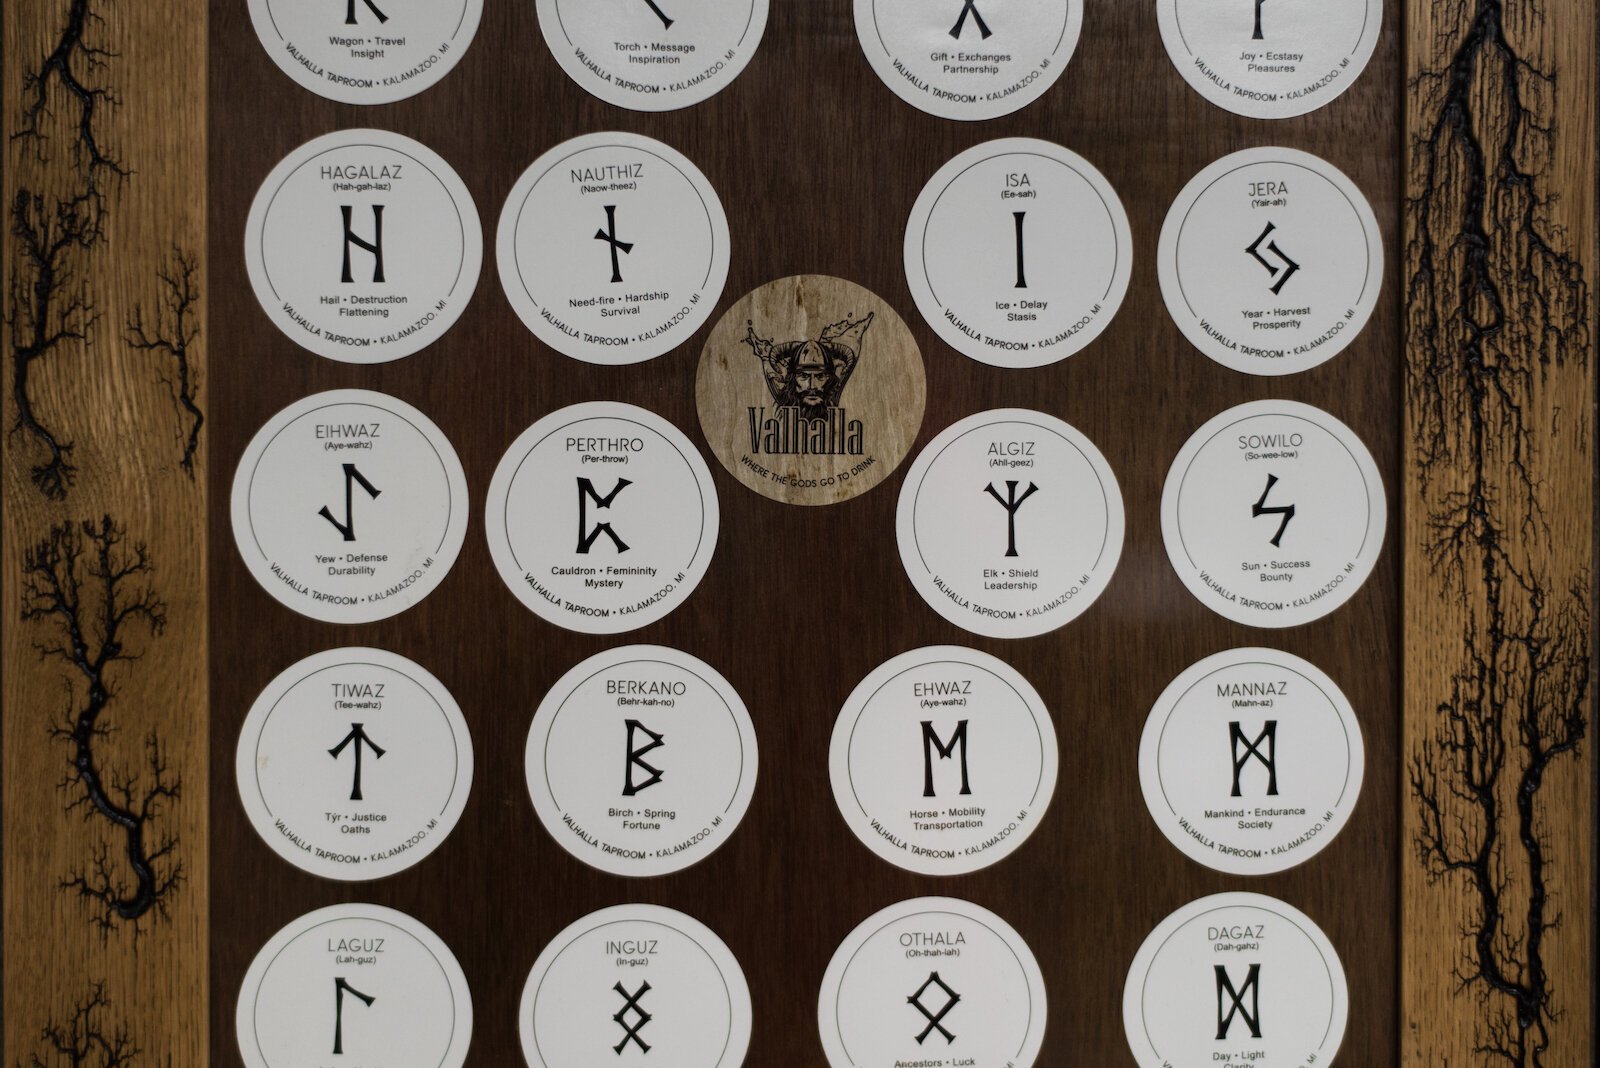 If you purchase a smoked mead (of your flavor choice), you get a Rune, a mysterious letter with a special meaning.